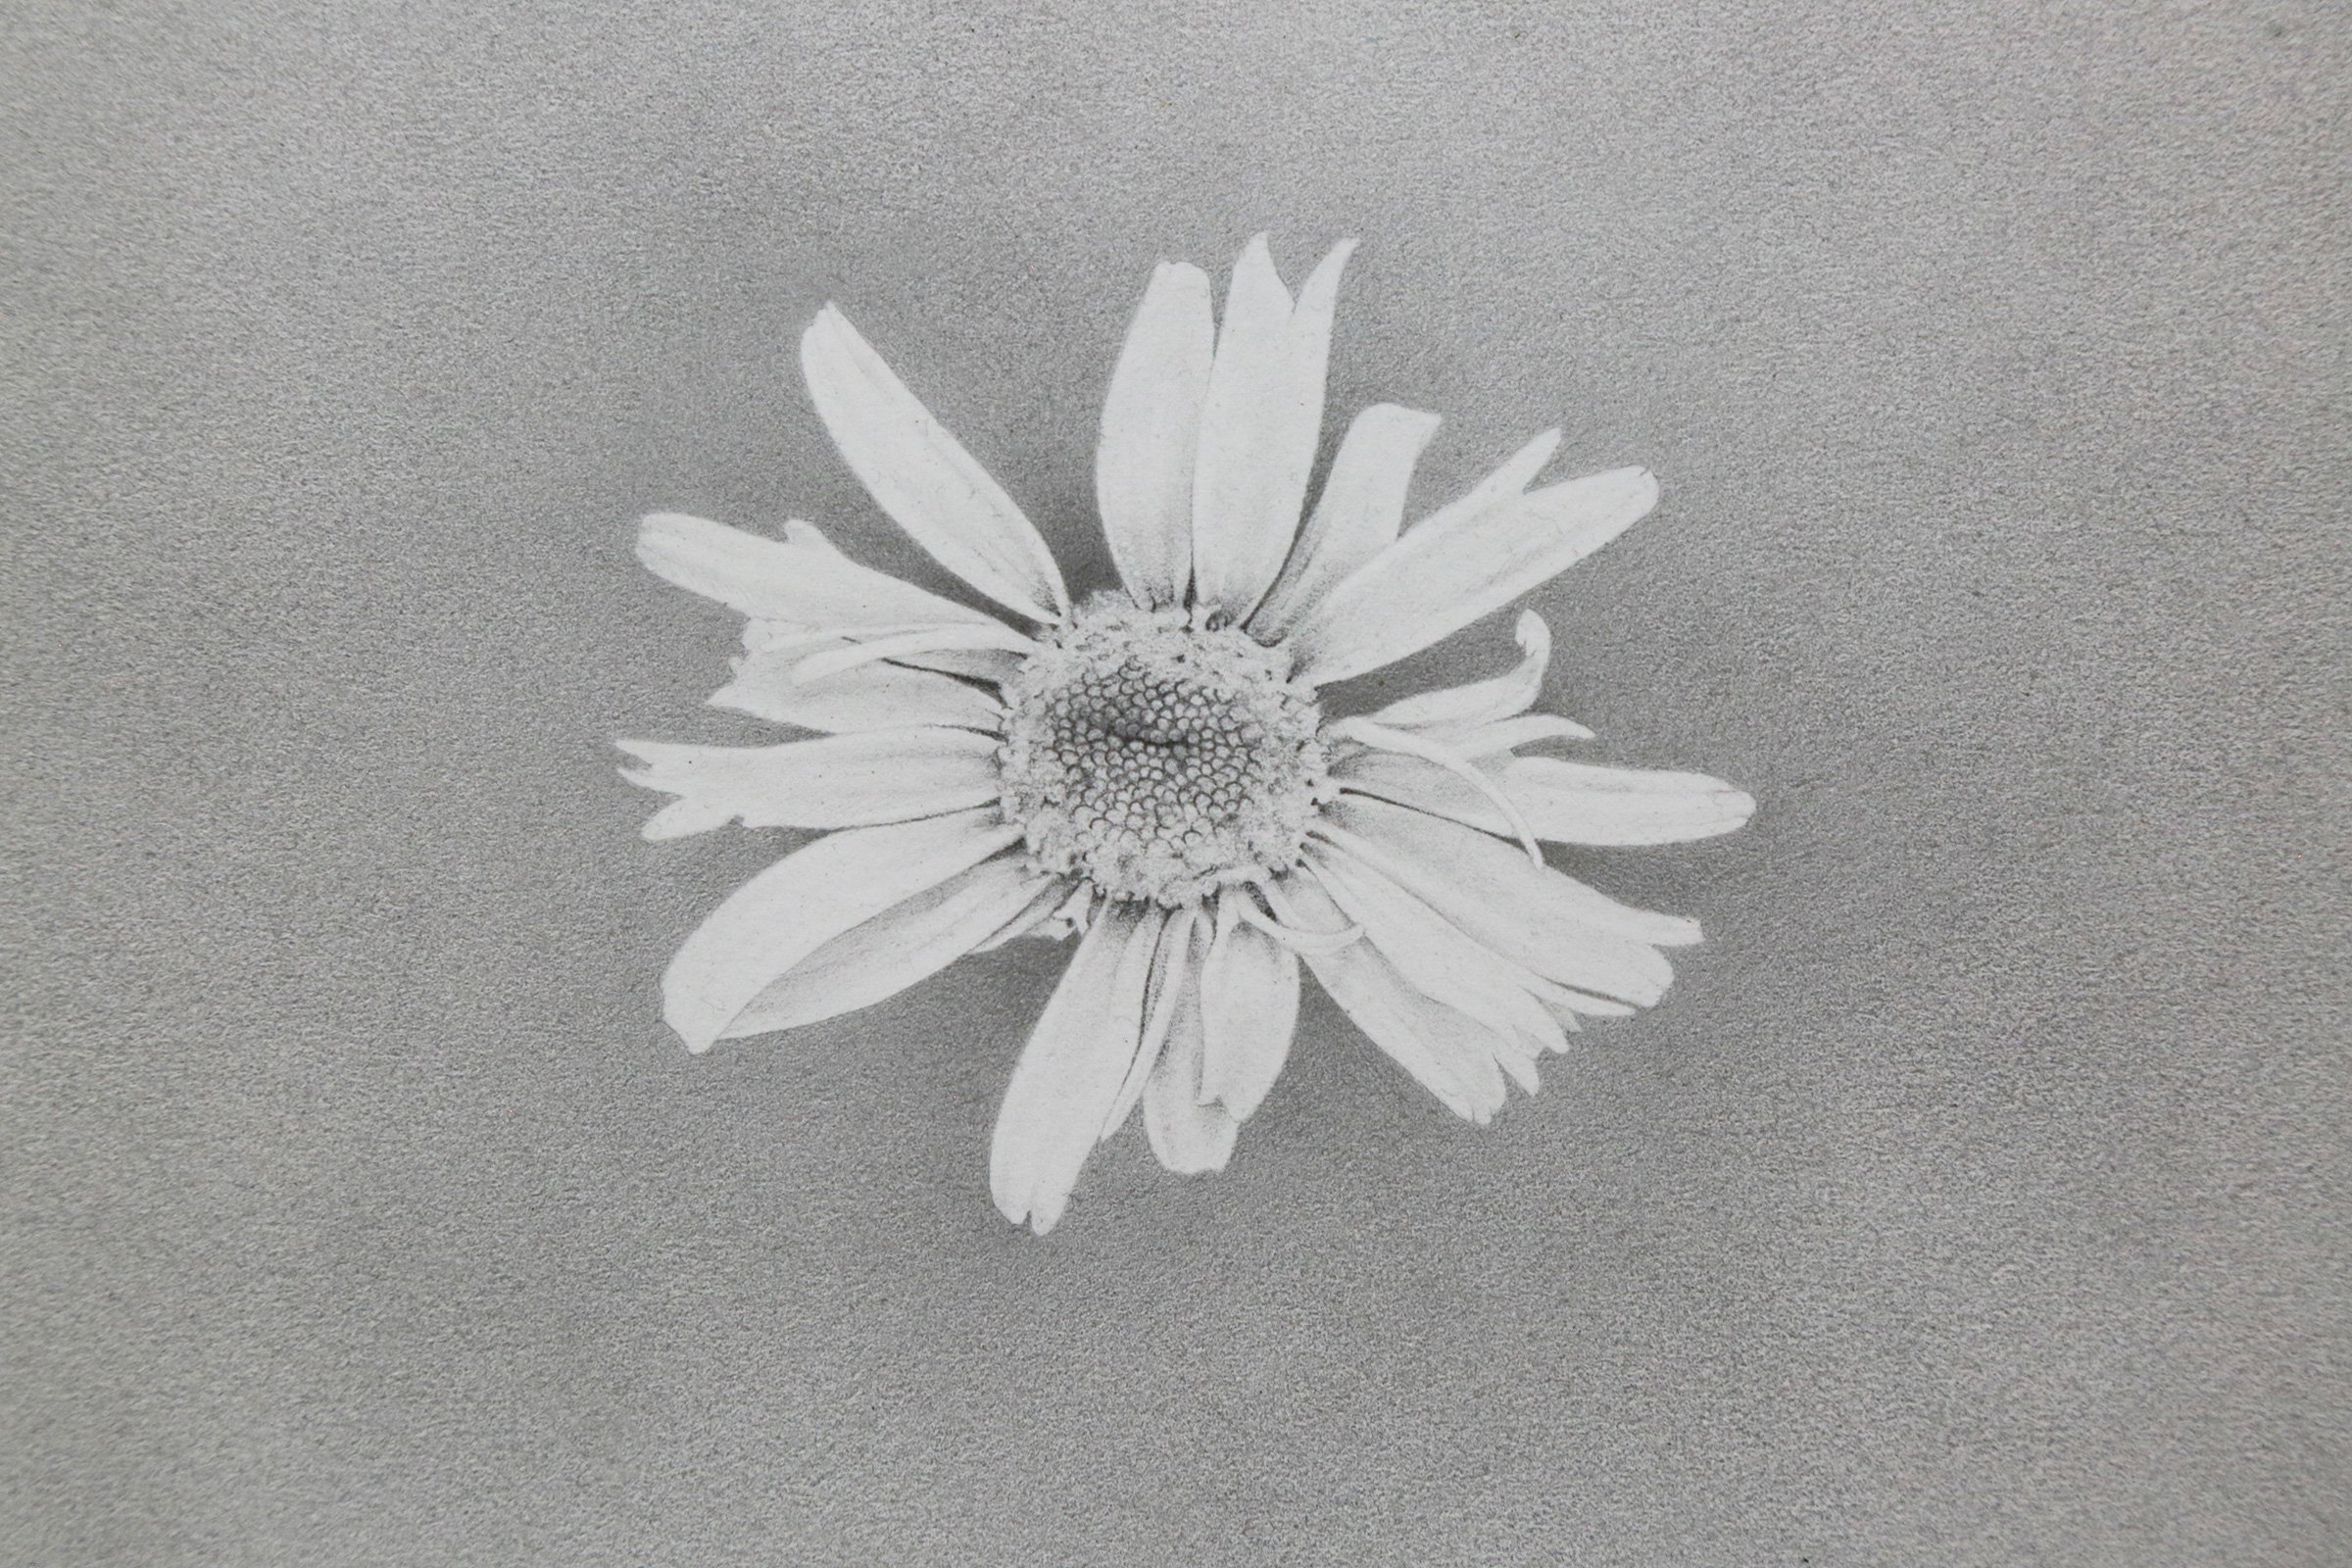 This is a graphite drawing of a daisy flower that looks a little odd, because the center of the flower is slightly creased, and some of the petals look misshapen. The blossom is centered in the middle of the drawing, surrounded by a matte, gray background also drawn in graphite.